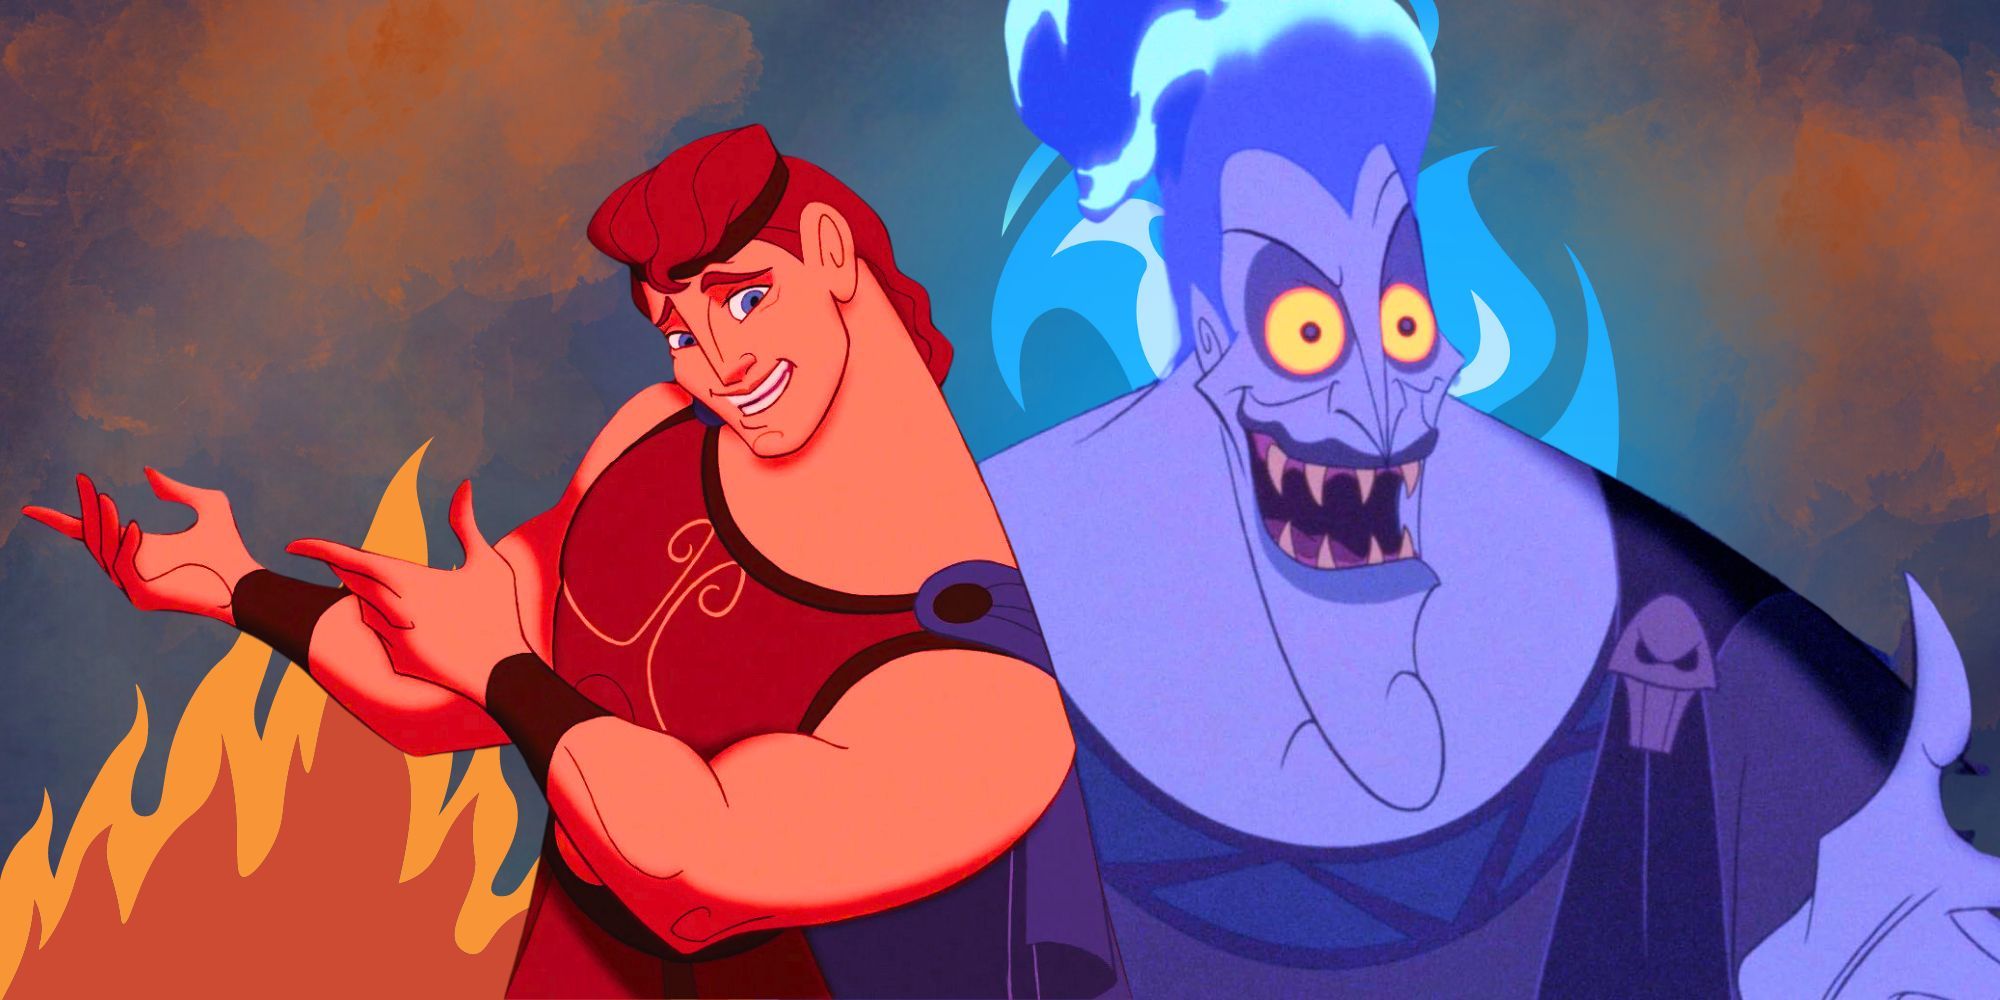 Disney's Hercules smiling next to Hades with a creepy smile